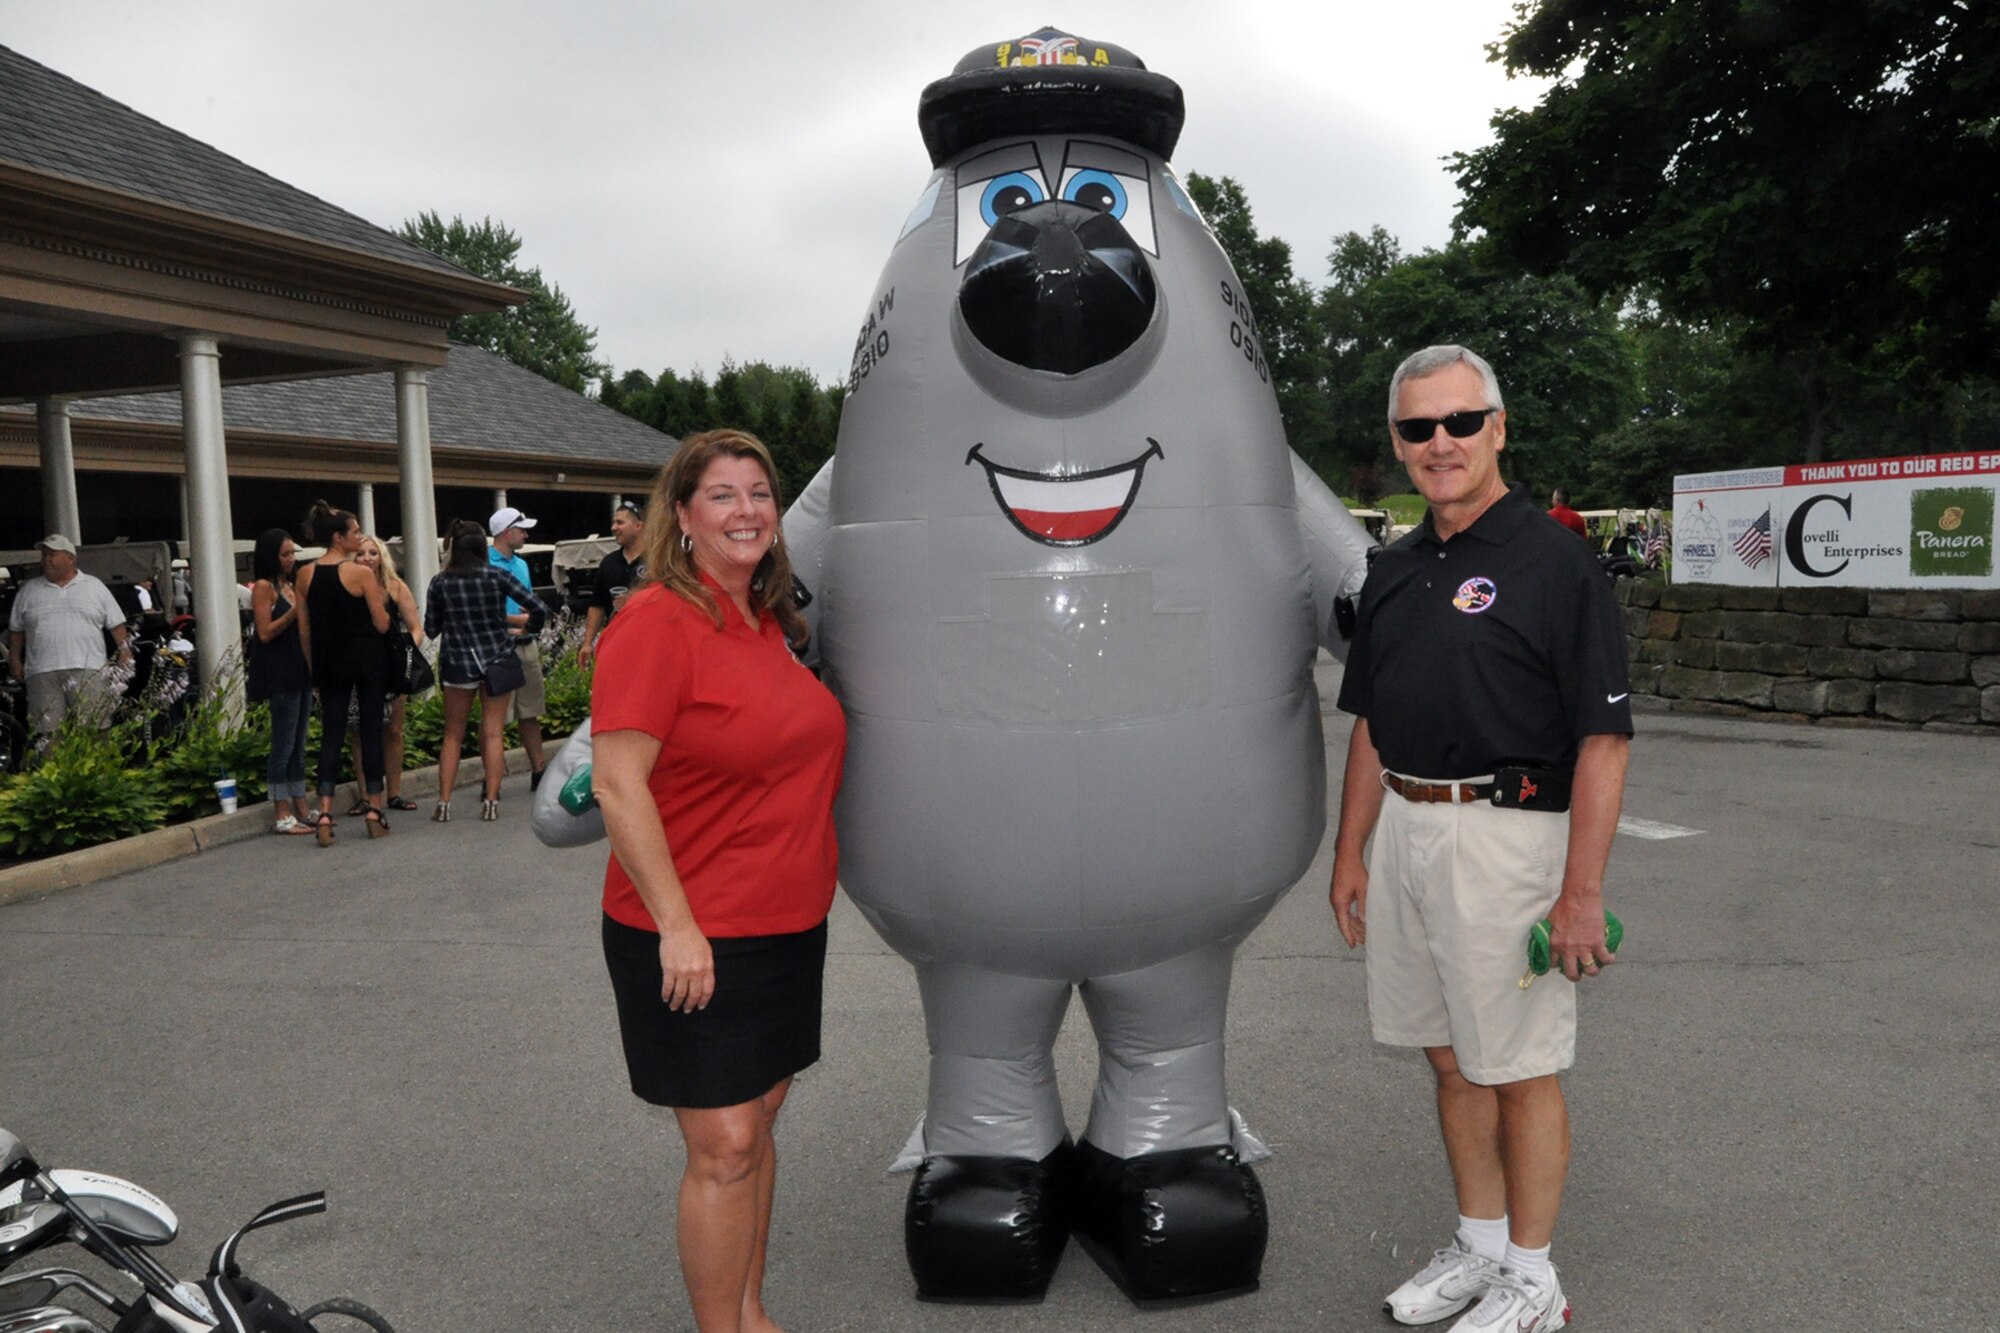 The 910th Airlift Wing's mascot, Winger (center), based at nearby Youngstown Air Reserve Station, Ohio, stands with Youngstown Air Reserve Base Community Council (YARBCC) Charitable Fund Chairperson Lisa Dickson (left) and Honorary Event Chairman Youngstown State University President James Tressel (right) during opening festivities of the 3rd Annual Freedom Warrior Golf Outing and Gala at Squaw Creek Country Club here, July 13, 2016. The mission of the YARBCC Charitable Fund, a 501(c)(3) public charity, is to raise and distribute monies to help support the basic and special needs of disabled and disadvantaged veterans as well as the emergency needs of local military personnel in Ohio’s Mahoning Valley and Pennsylvania’s Shenango Valley. Monies are raised through the annual golf outing event as well as generous donations throughout the year from individuals and organizations. Since August 2014, the fund has granted over $130,000 in grants to individual veterans in need. (Courtesy Photo/Ms. Brenda Rider)   